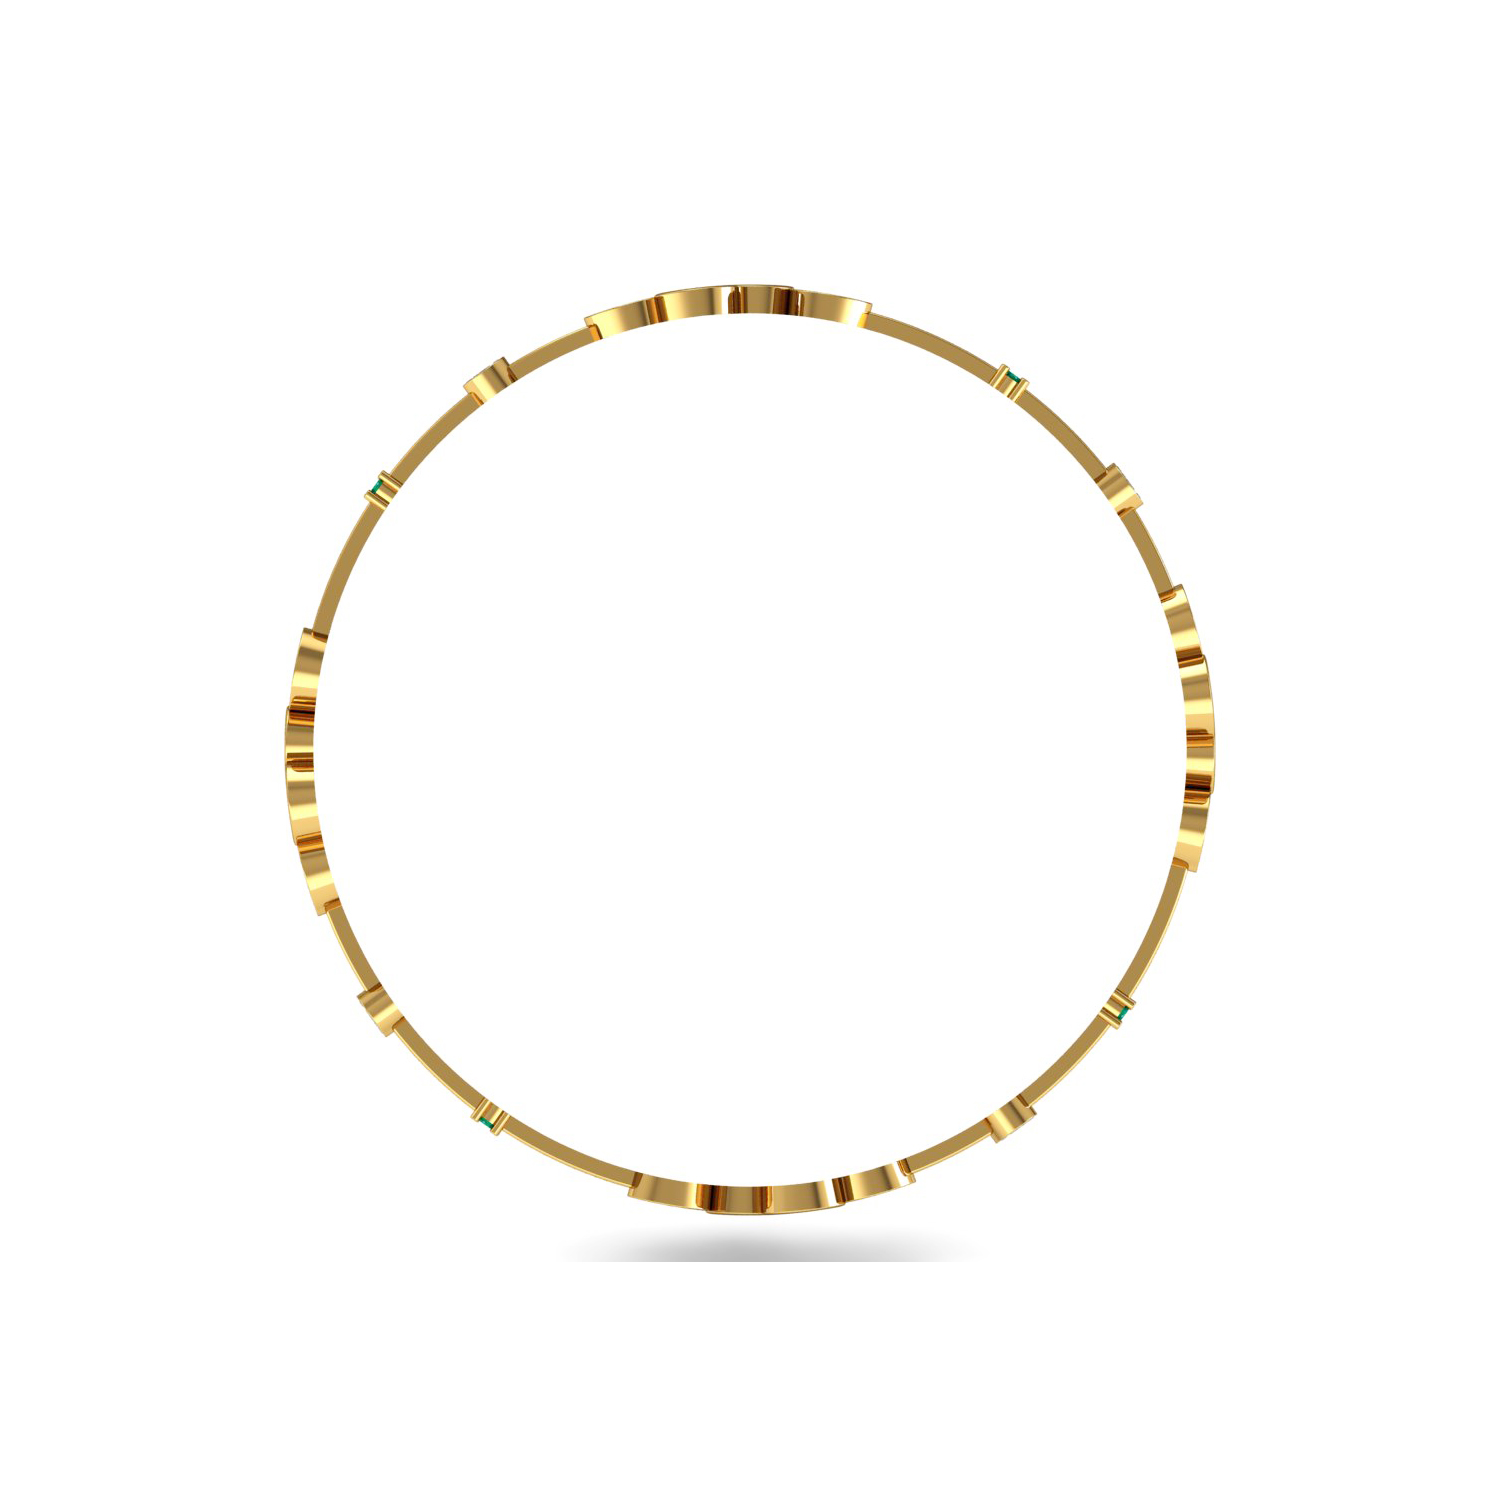 Natural diamond bangle set in solid gold